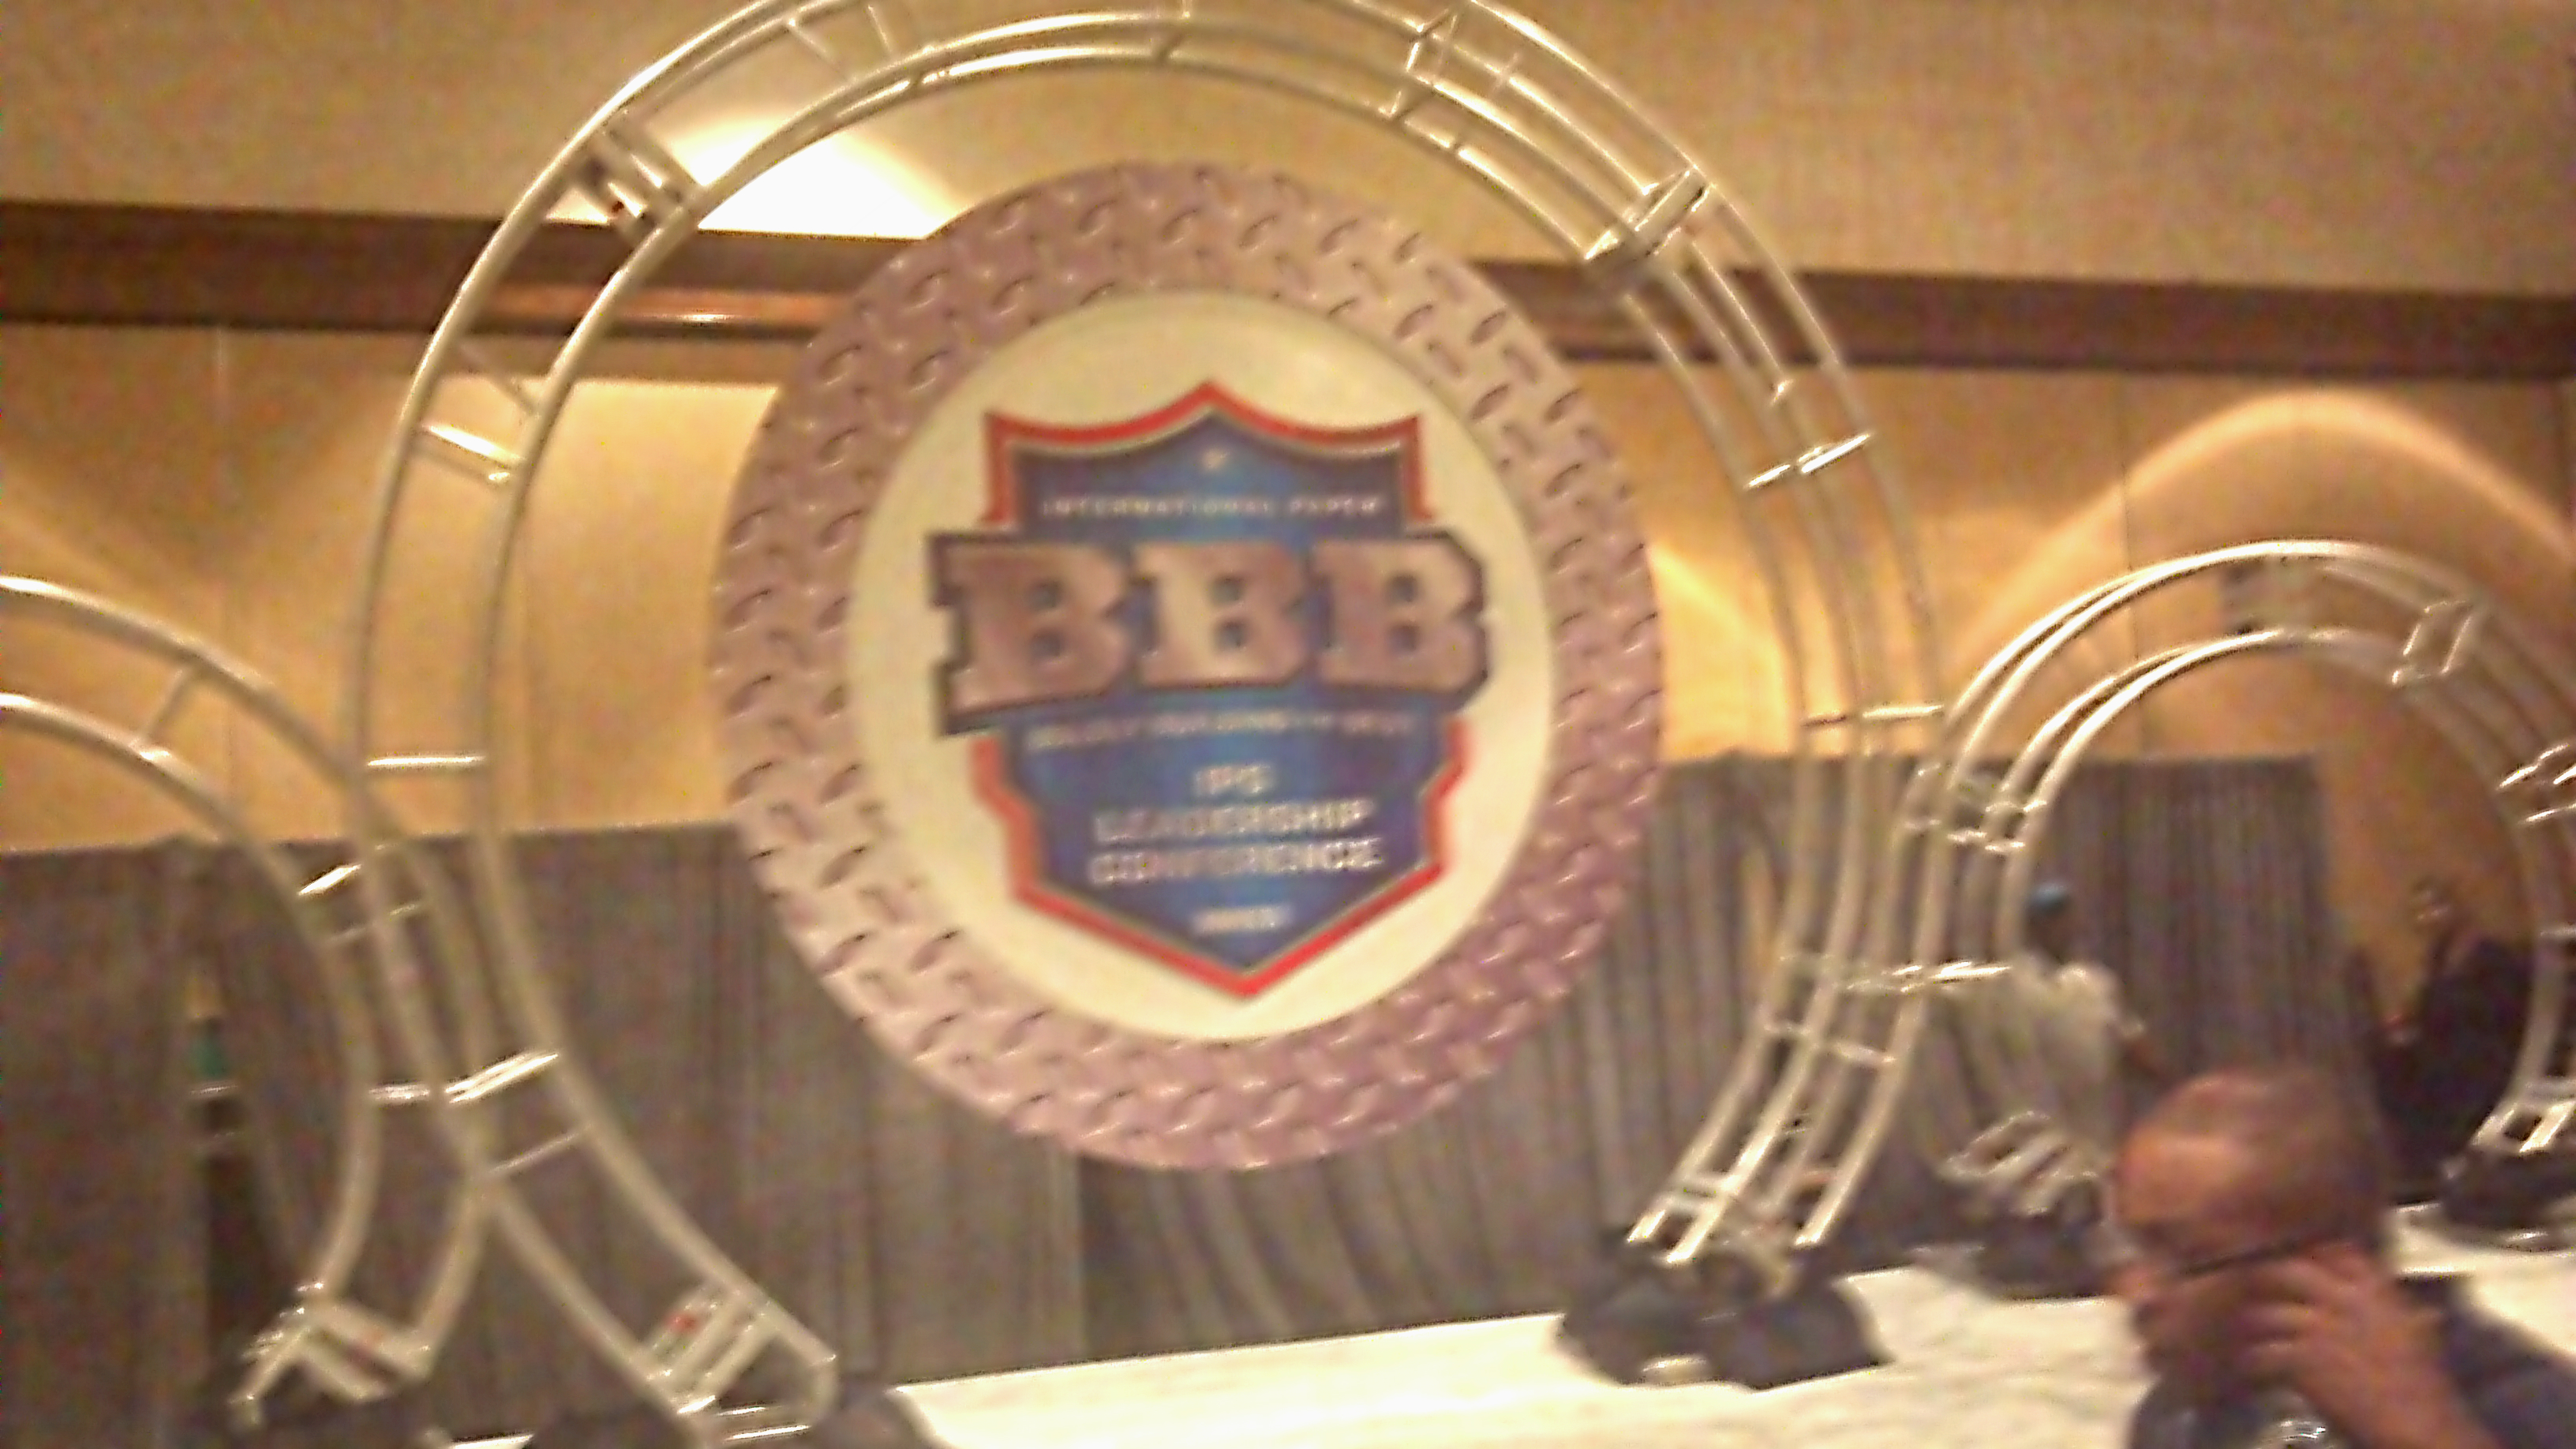 BBB Conference Display